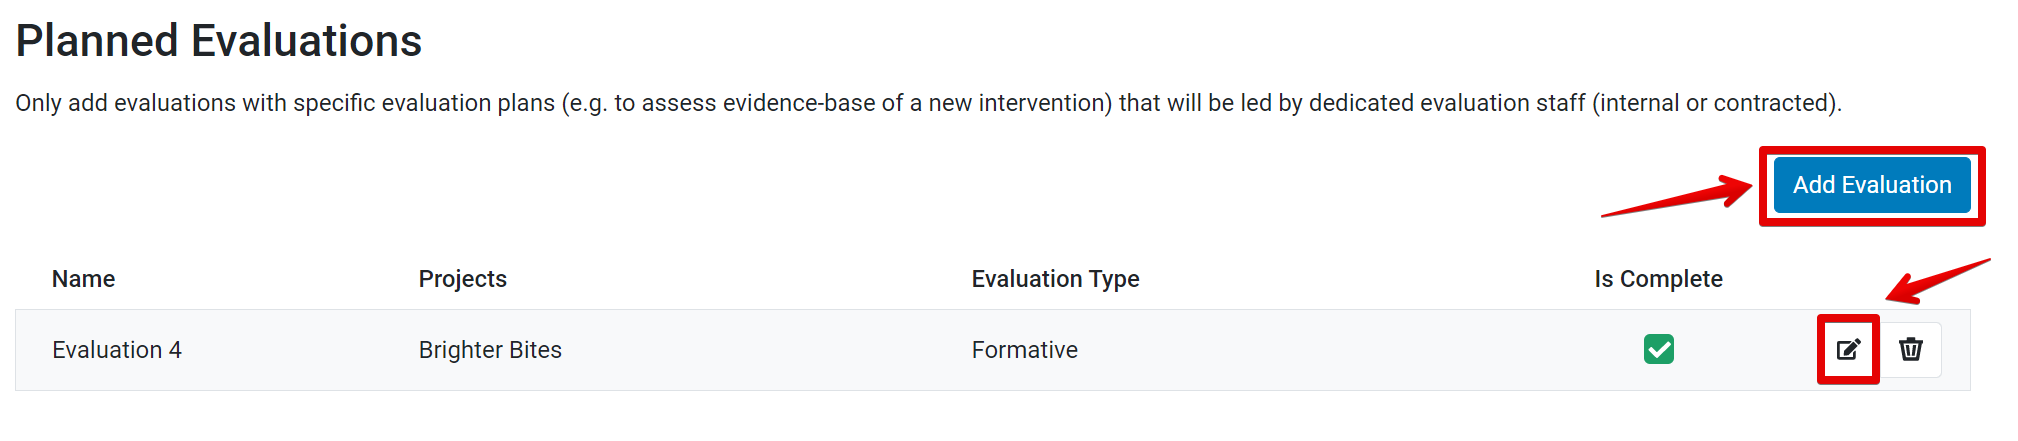 Add evaluation button and edit saved evaluation